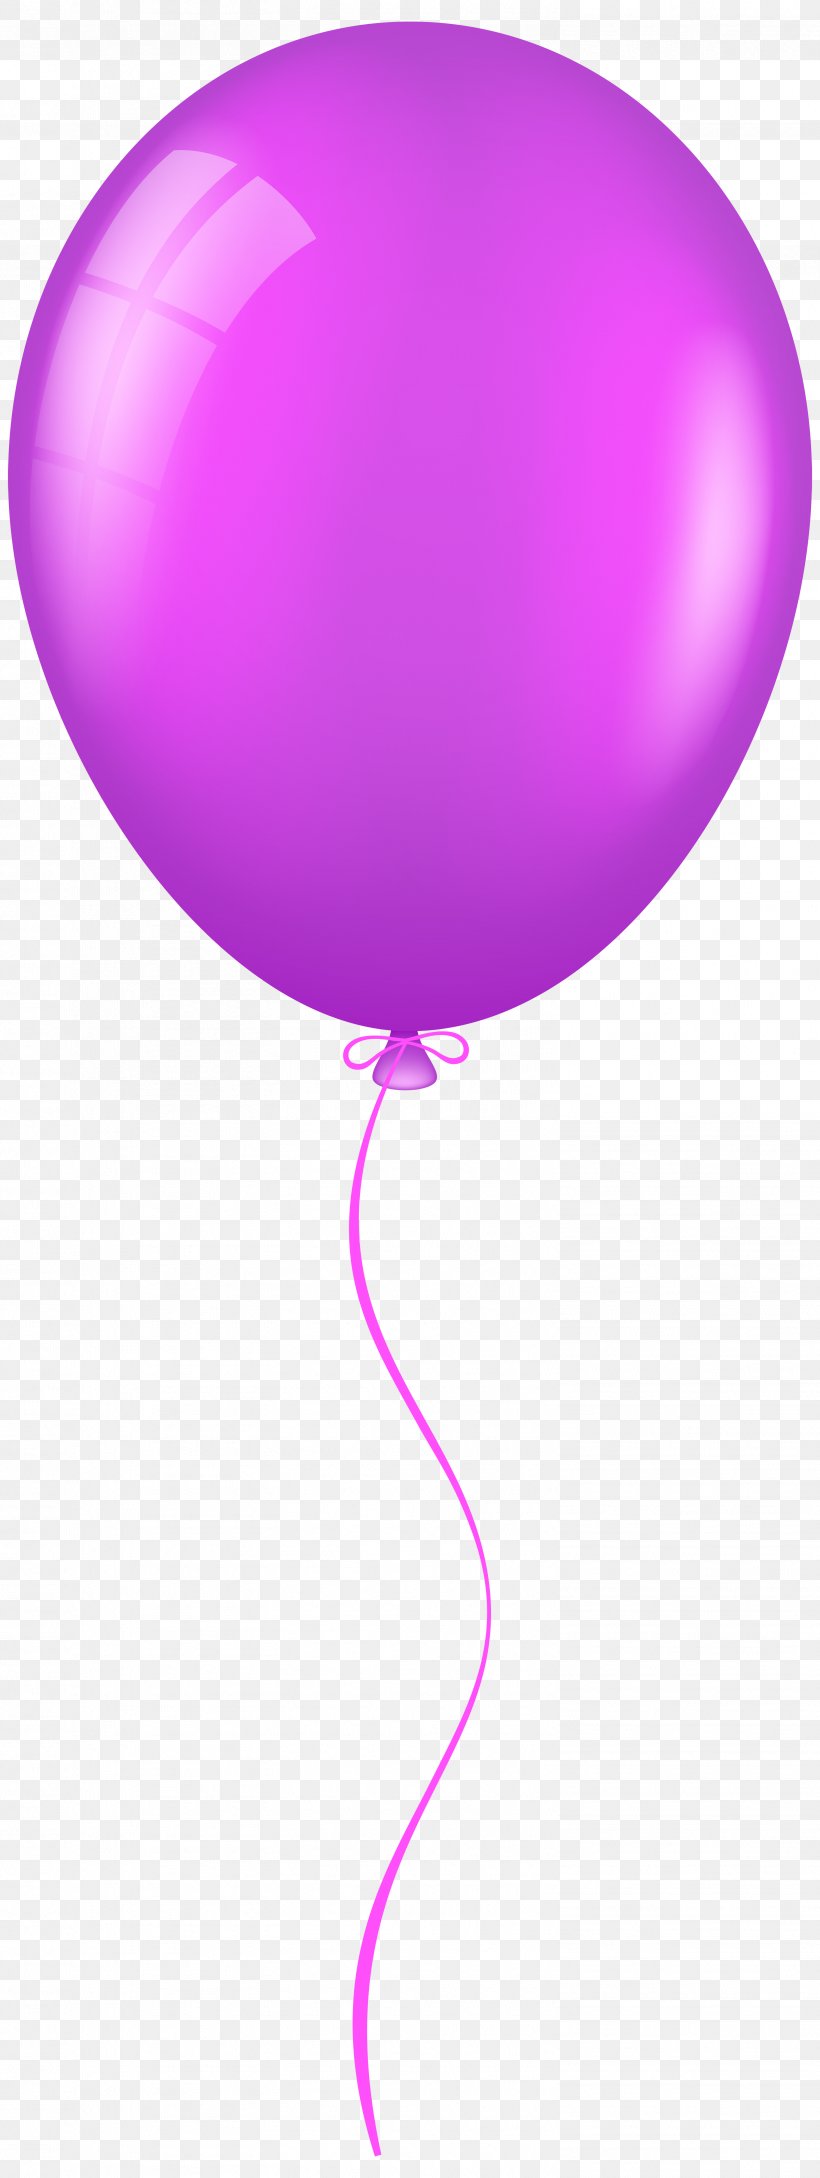 Balloon Purple Clip Art, PNG, 3011x8000px, Balloon, Color, Lavender, Magenta, Pink Download Free